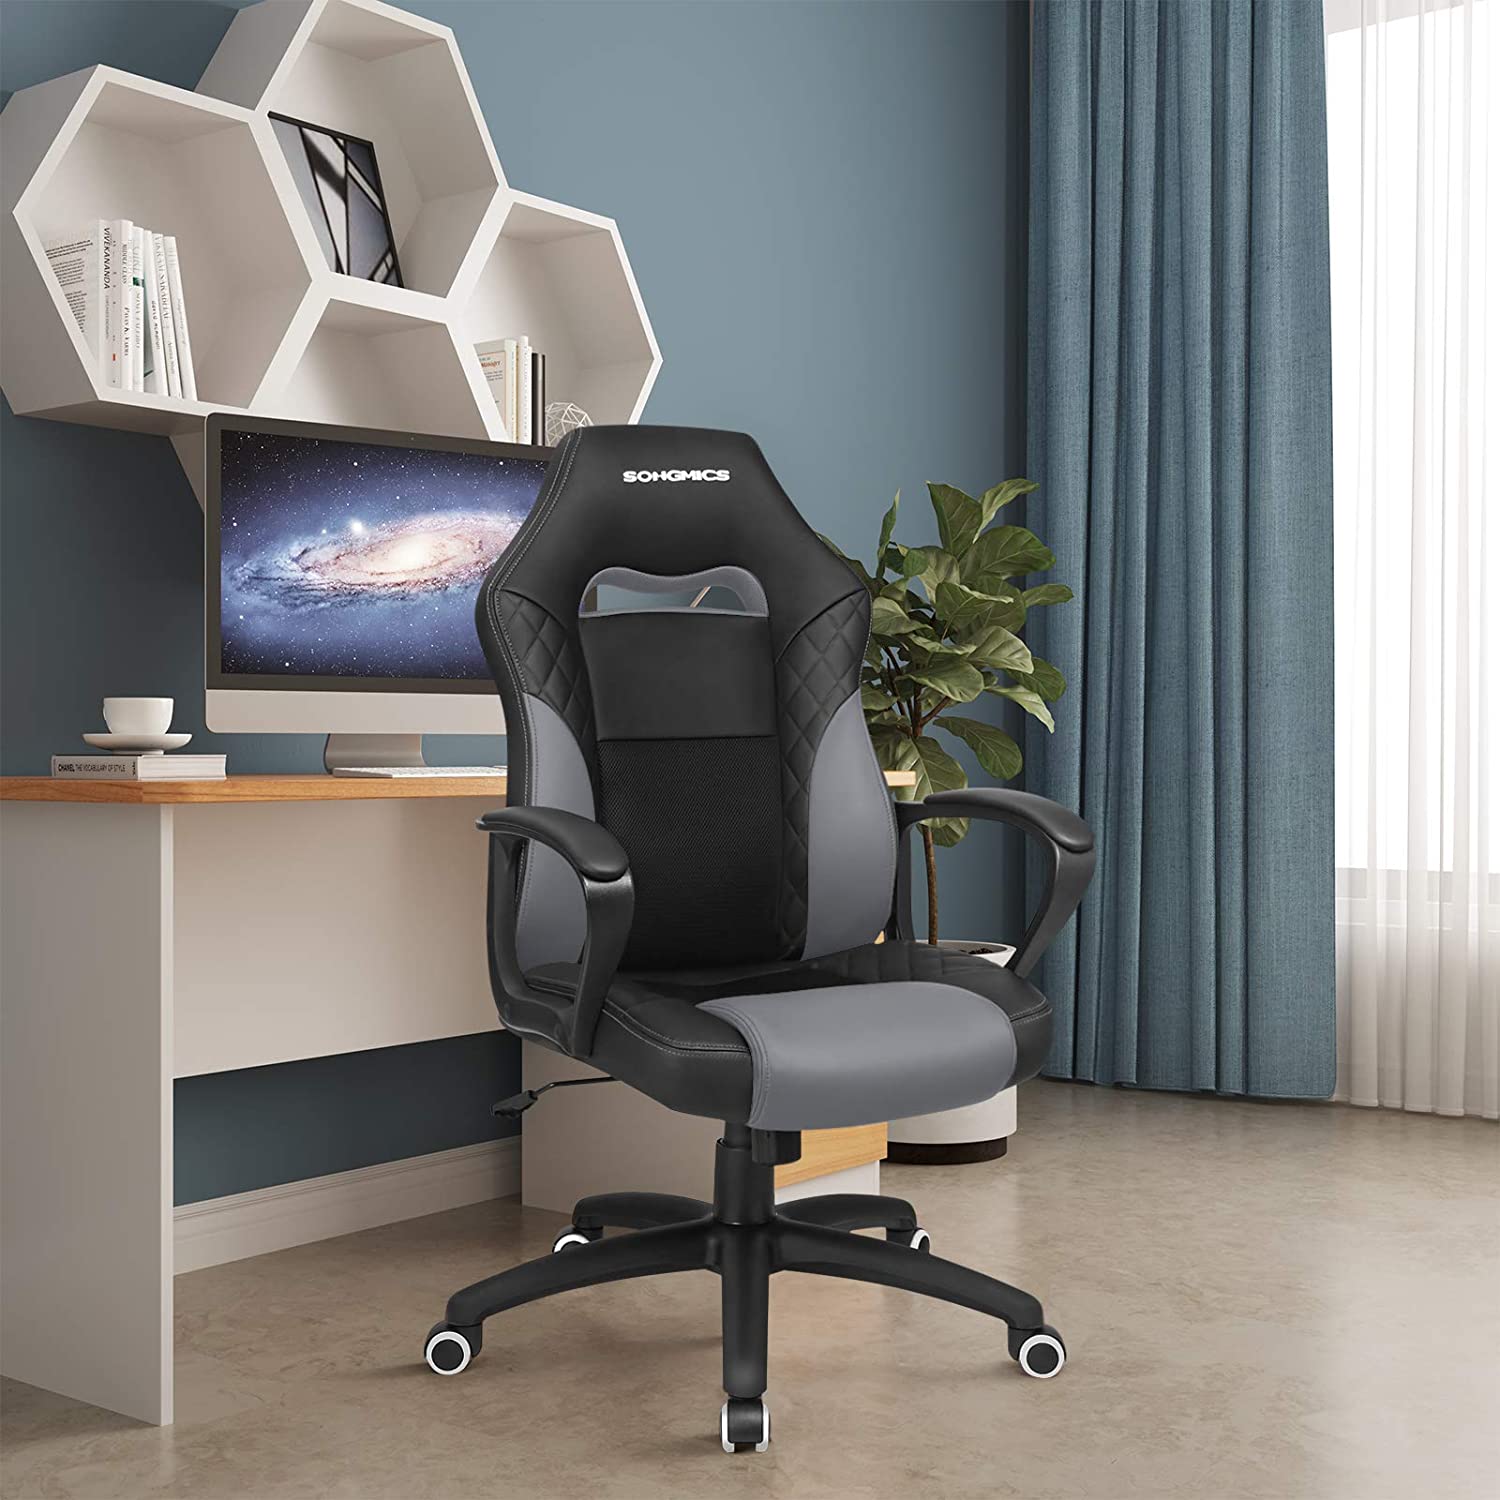 Nancy's Haydon Office chair - Gaming chair - Rocking function - Ergonomic - Faux leather - Black - Gray - 70 x 64 x (106-116) 